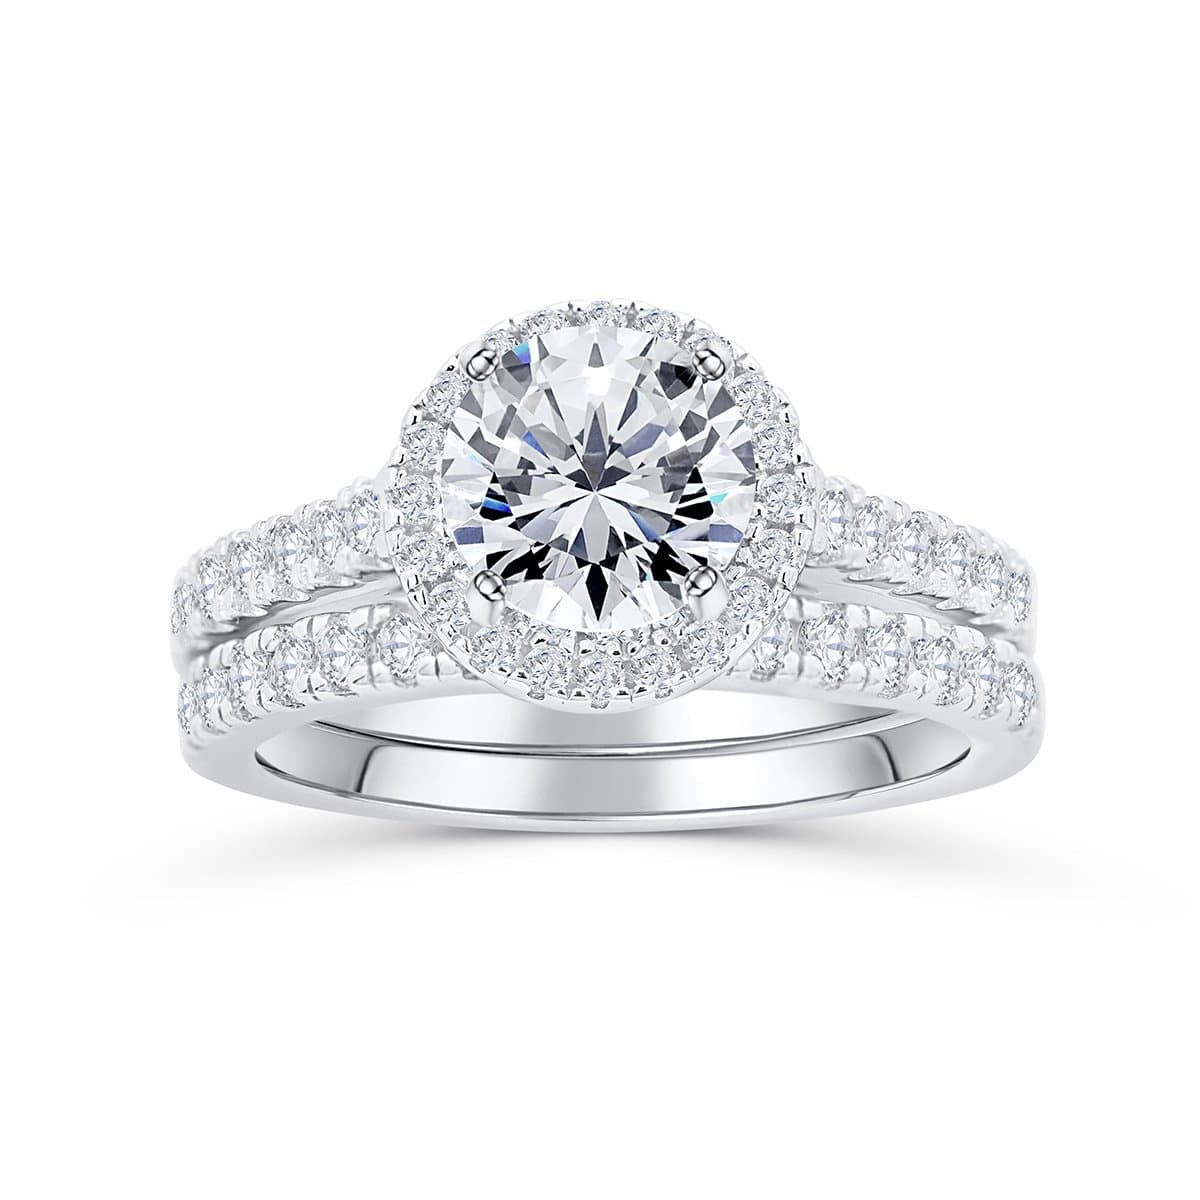 1.50 CT  Round Diamond Bridal Set Ring For Her